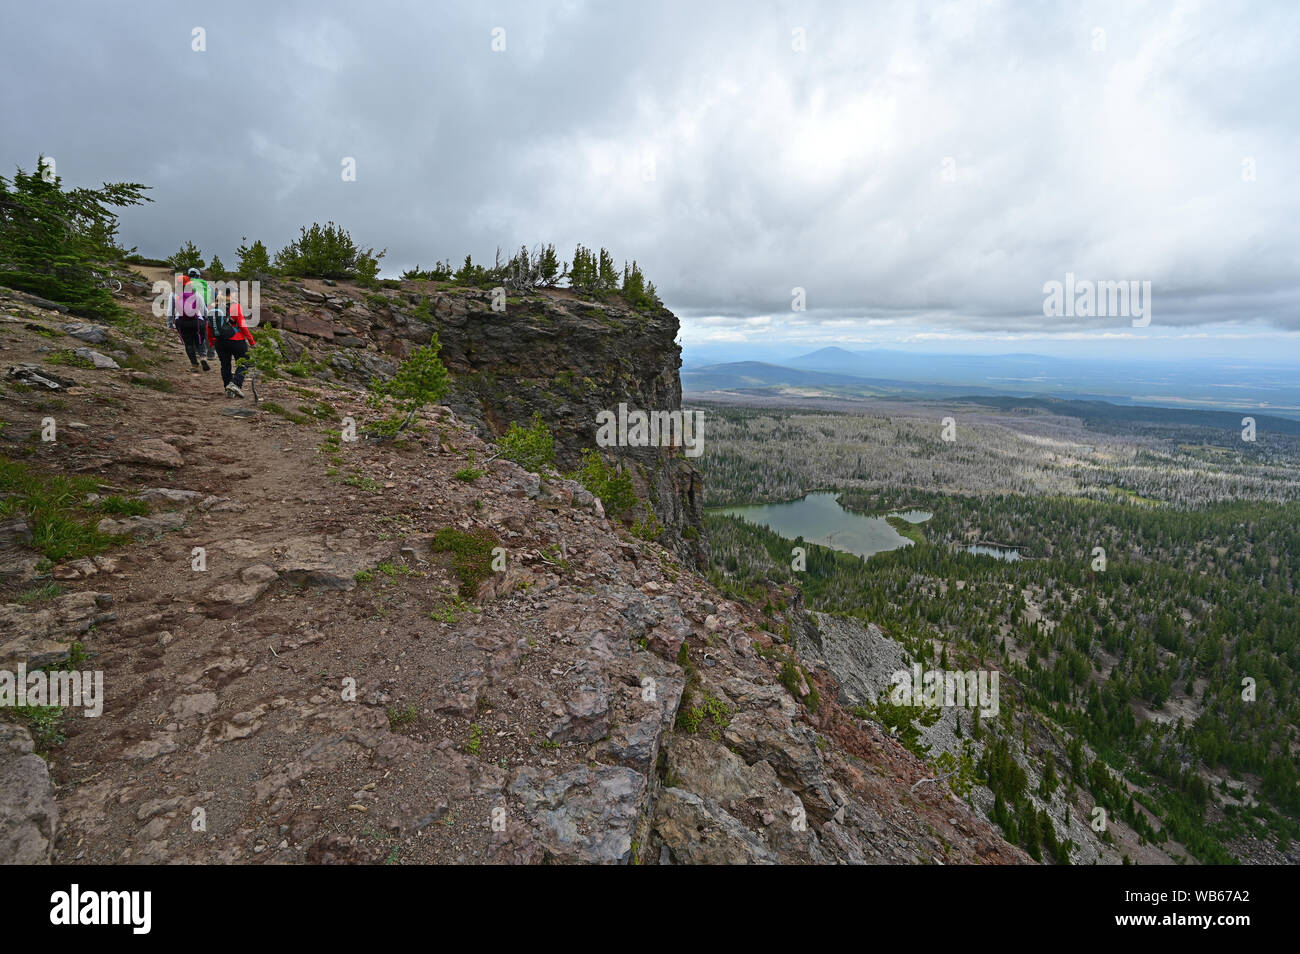 Hikers on the Tam McArthur Rim Trail in the Three Sisters vWilderness near Sisters, Oregon. Stock Photo